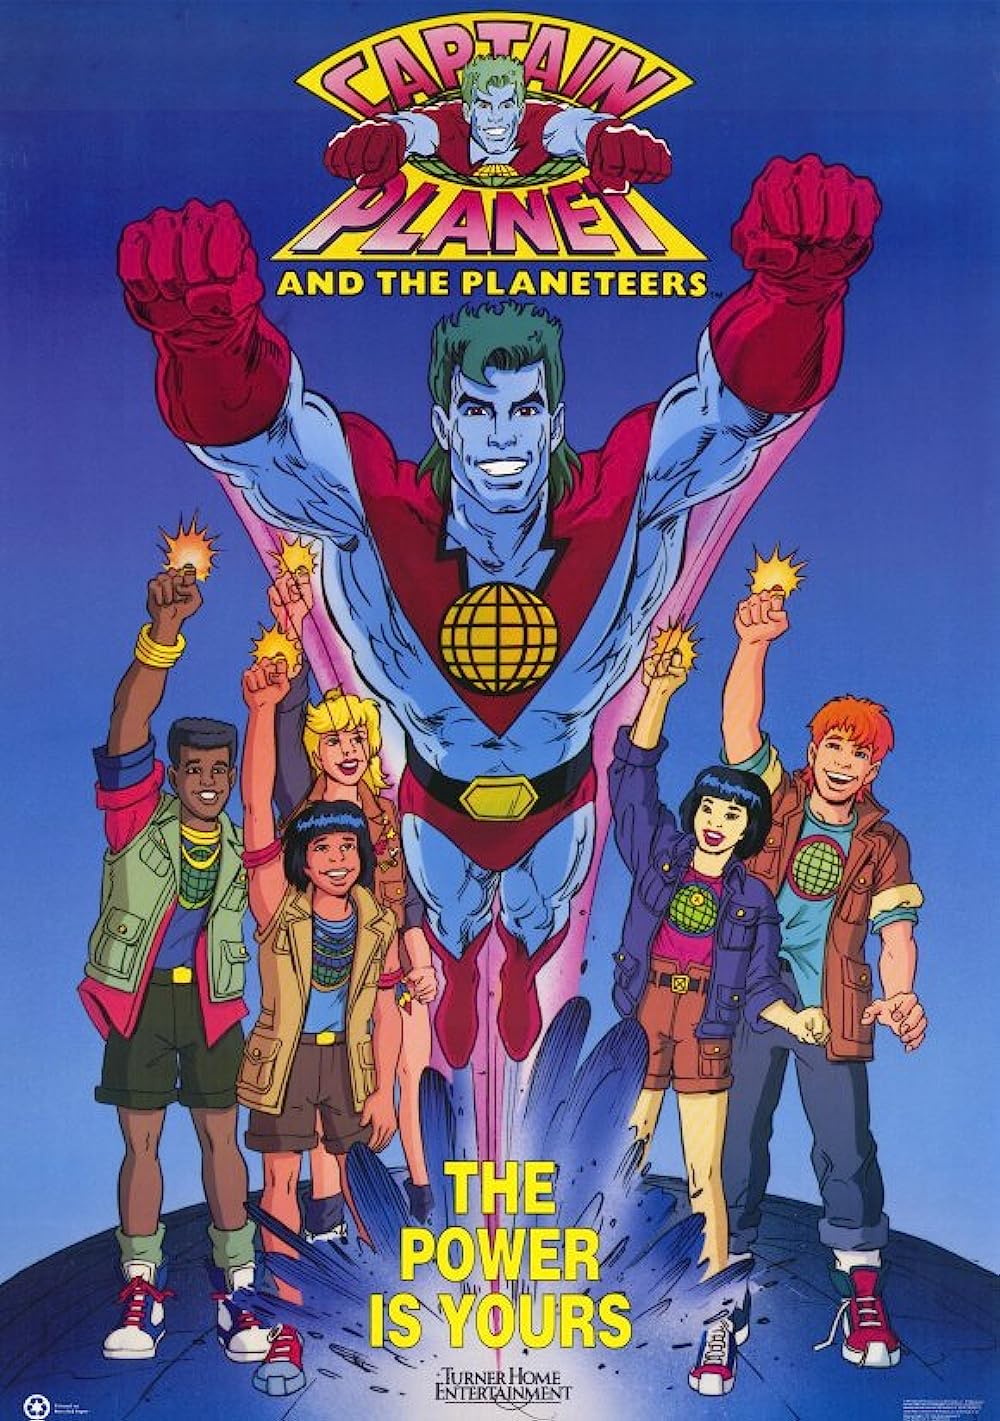 A poster of Captain Planet, flying toward the screen, while the Planeteers raise their power rings behind him. The text at the bottom reads, "The Power is Yours."